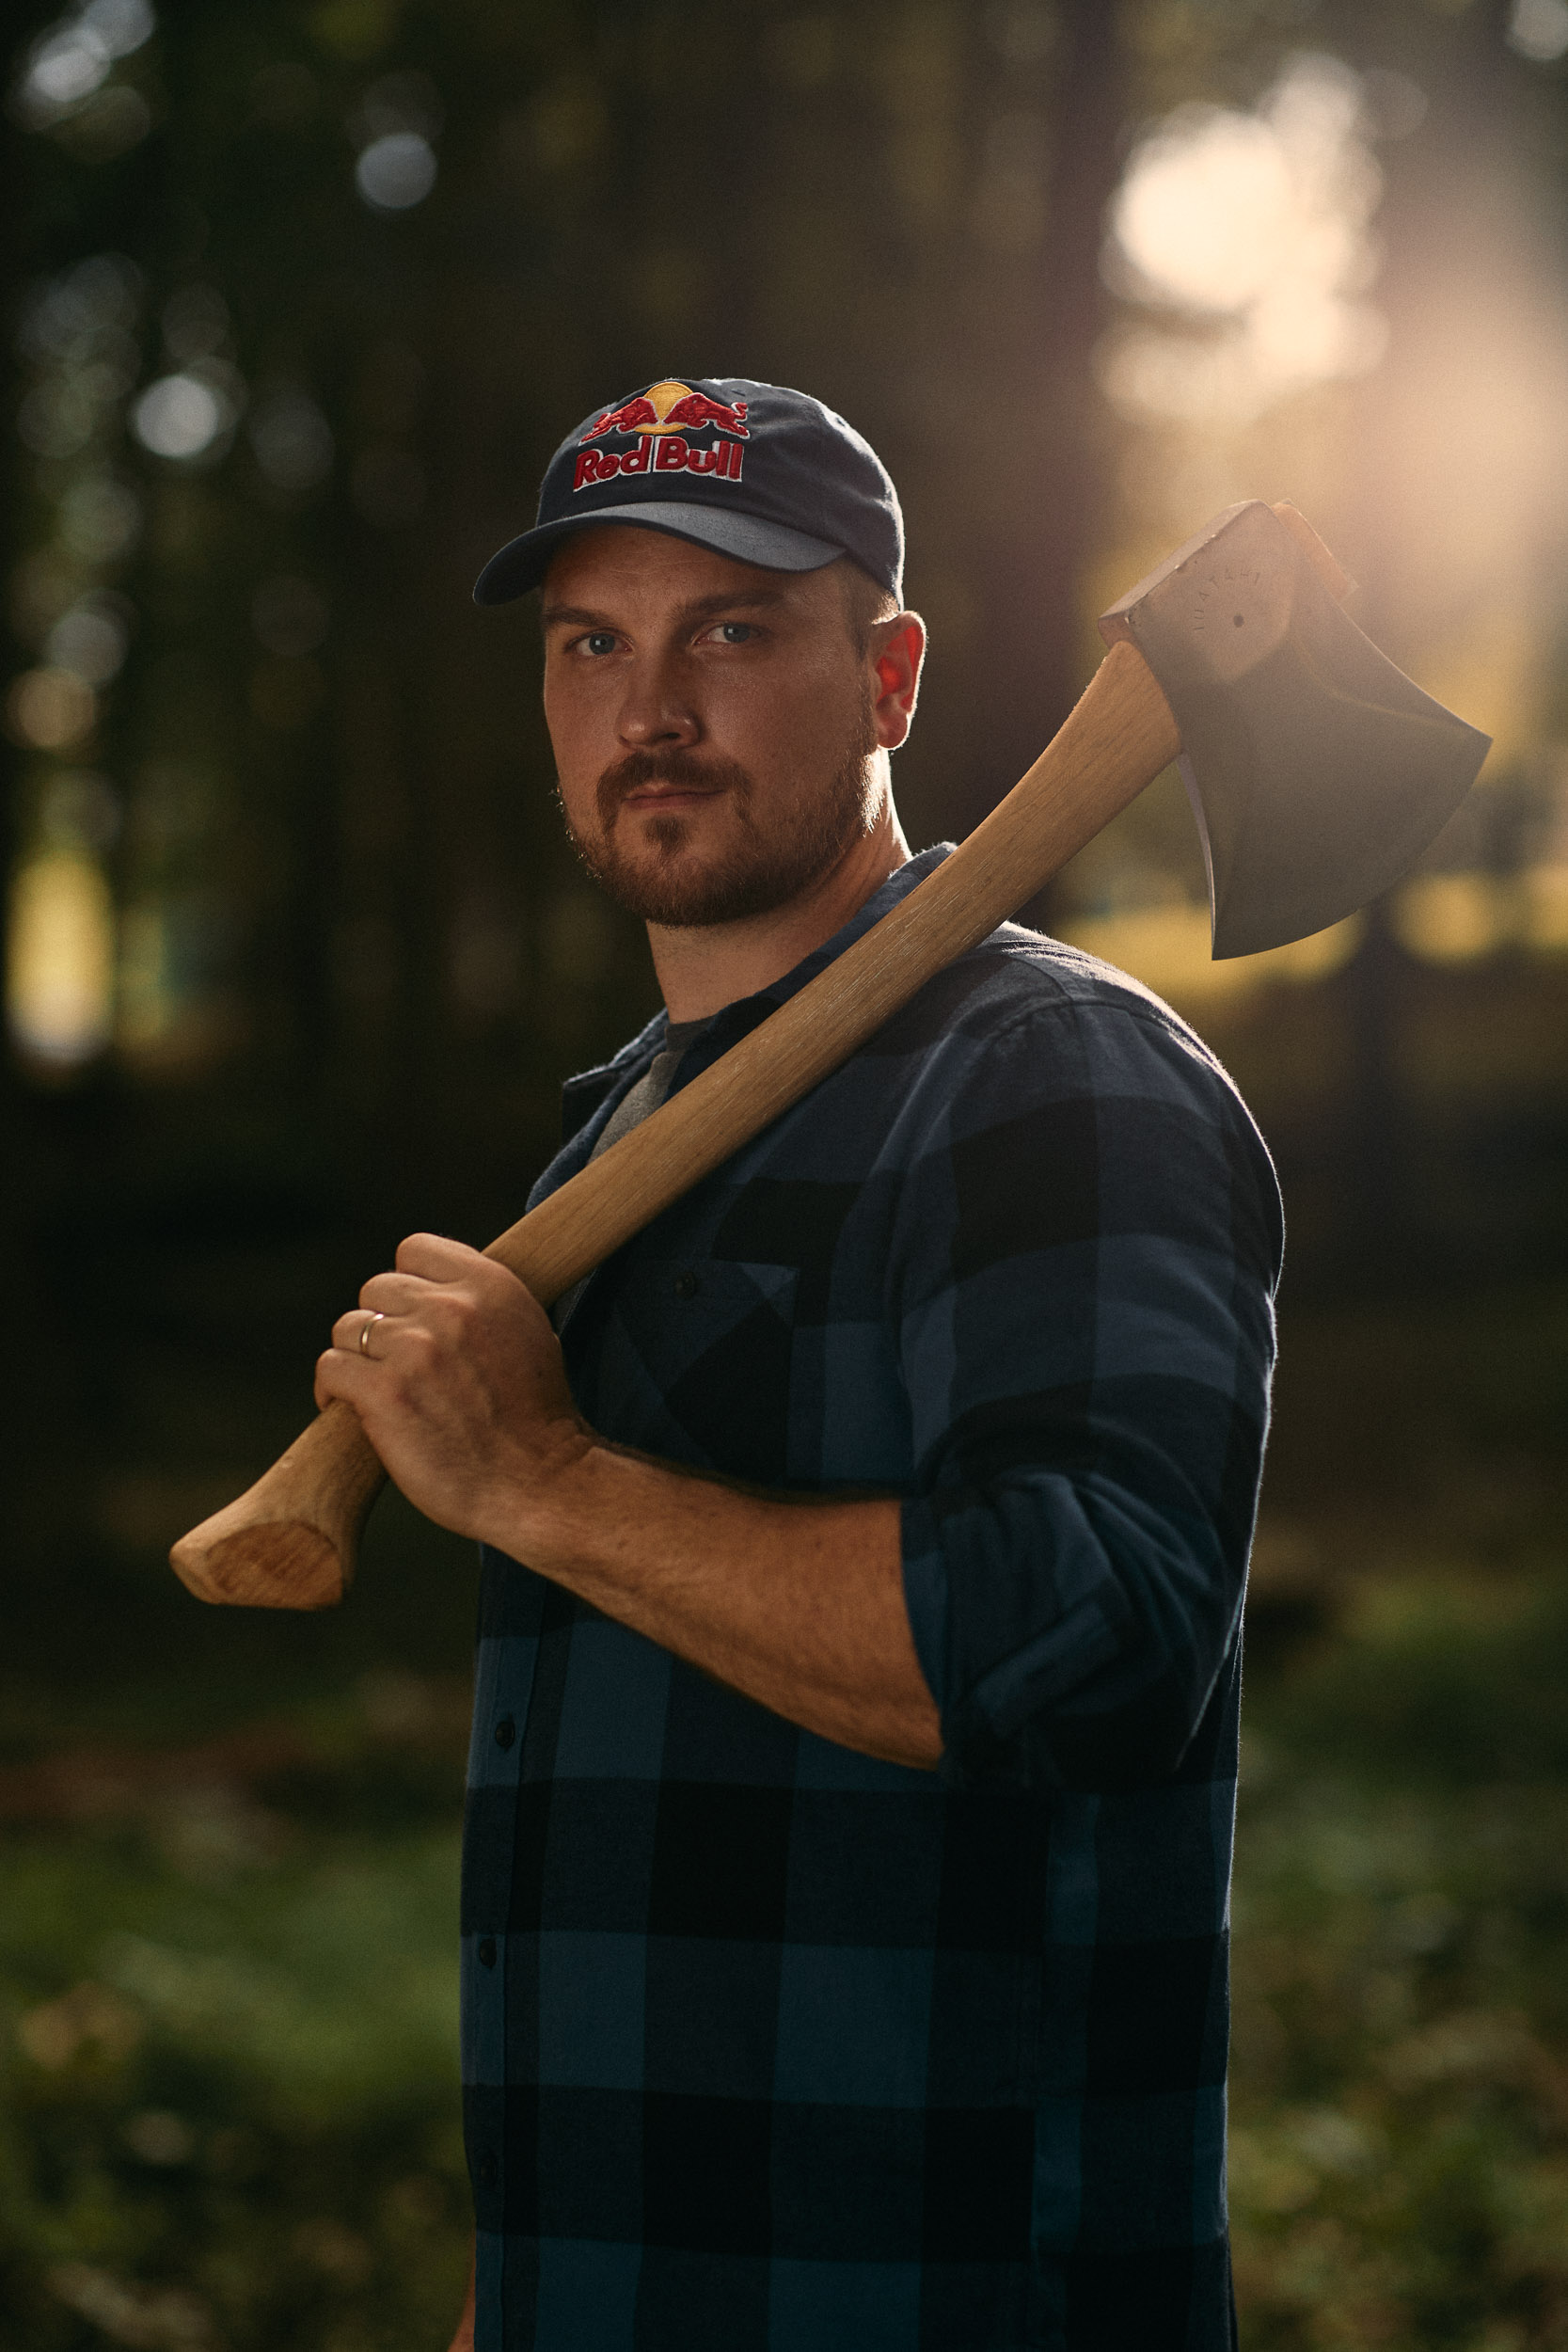 RED BULL ACTION SPORTS PHOTOGRAPHY OF WORLD CHAMPION TIMBERSPORTS ATHLETE MATT COGAR BY COMMERCIAL SPORTS ADVERTISING PHOTOGRAPHER SHAWN HUBBARD